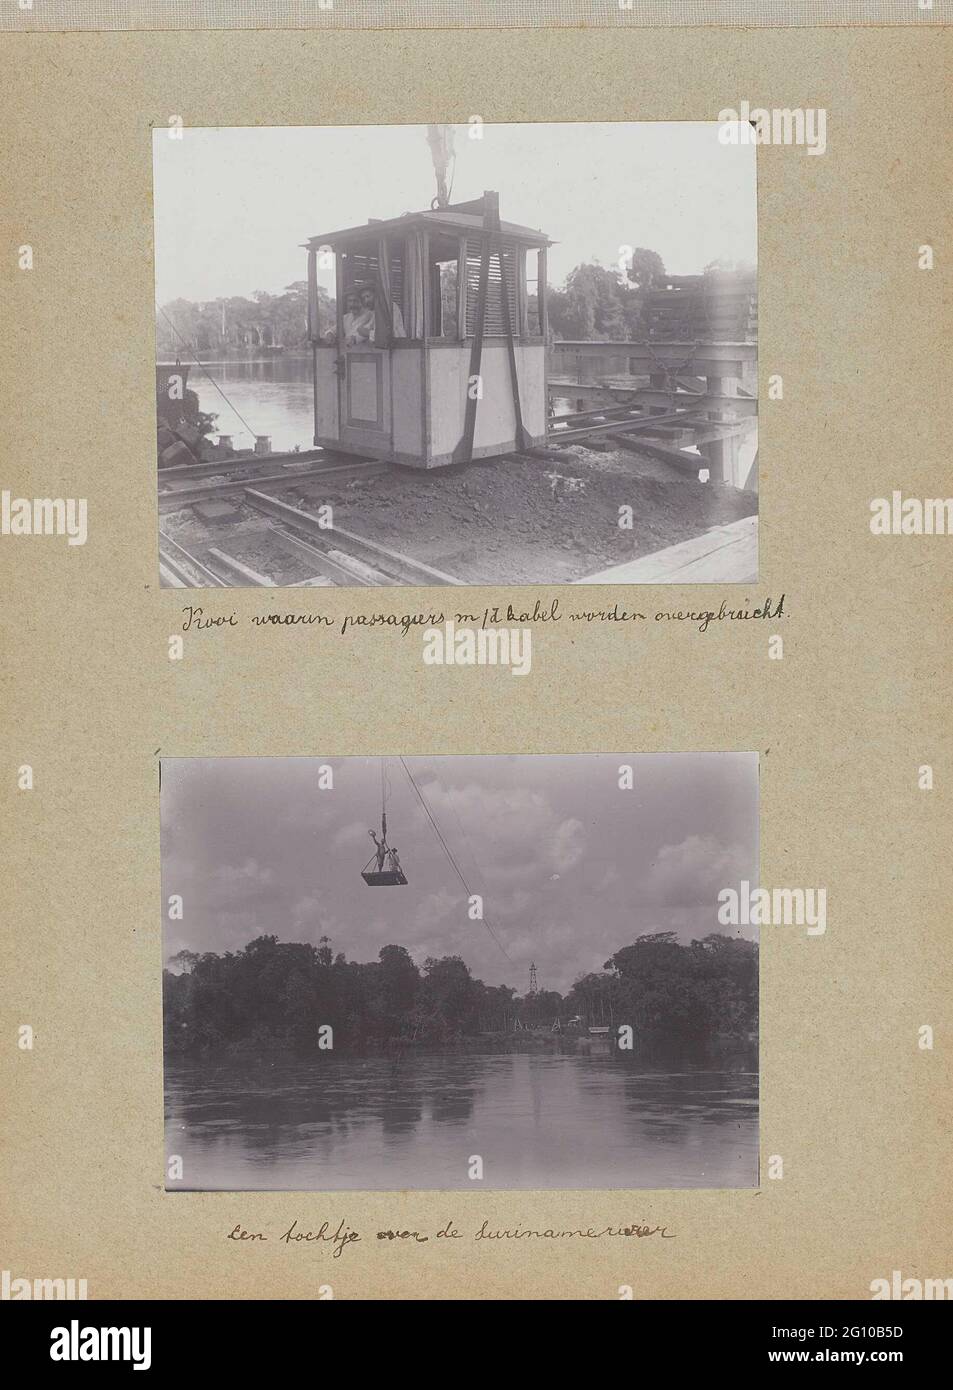 Cage in which passengers M / D are transferred / a trip over the surinamer river. Album leaf with two photos. Above: the cage in which passengers can be brought across the river with the cable bridge. Below: two men make the crossing with the cable bridge. Photos in the photo album about the construction of the Lawaspoor road in Suriname in the years 1903-1912. Part of a group of objects from the Wesenhagen family in Suriname. Stock Photo